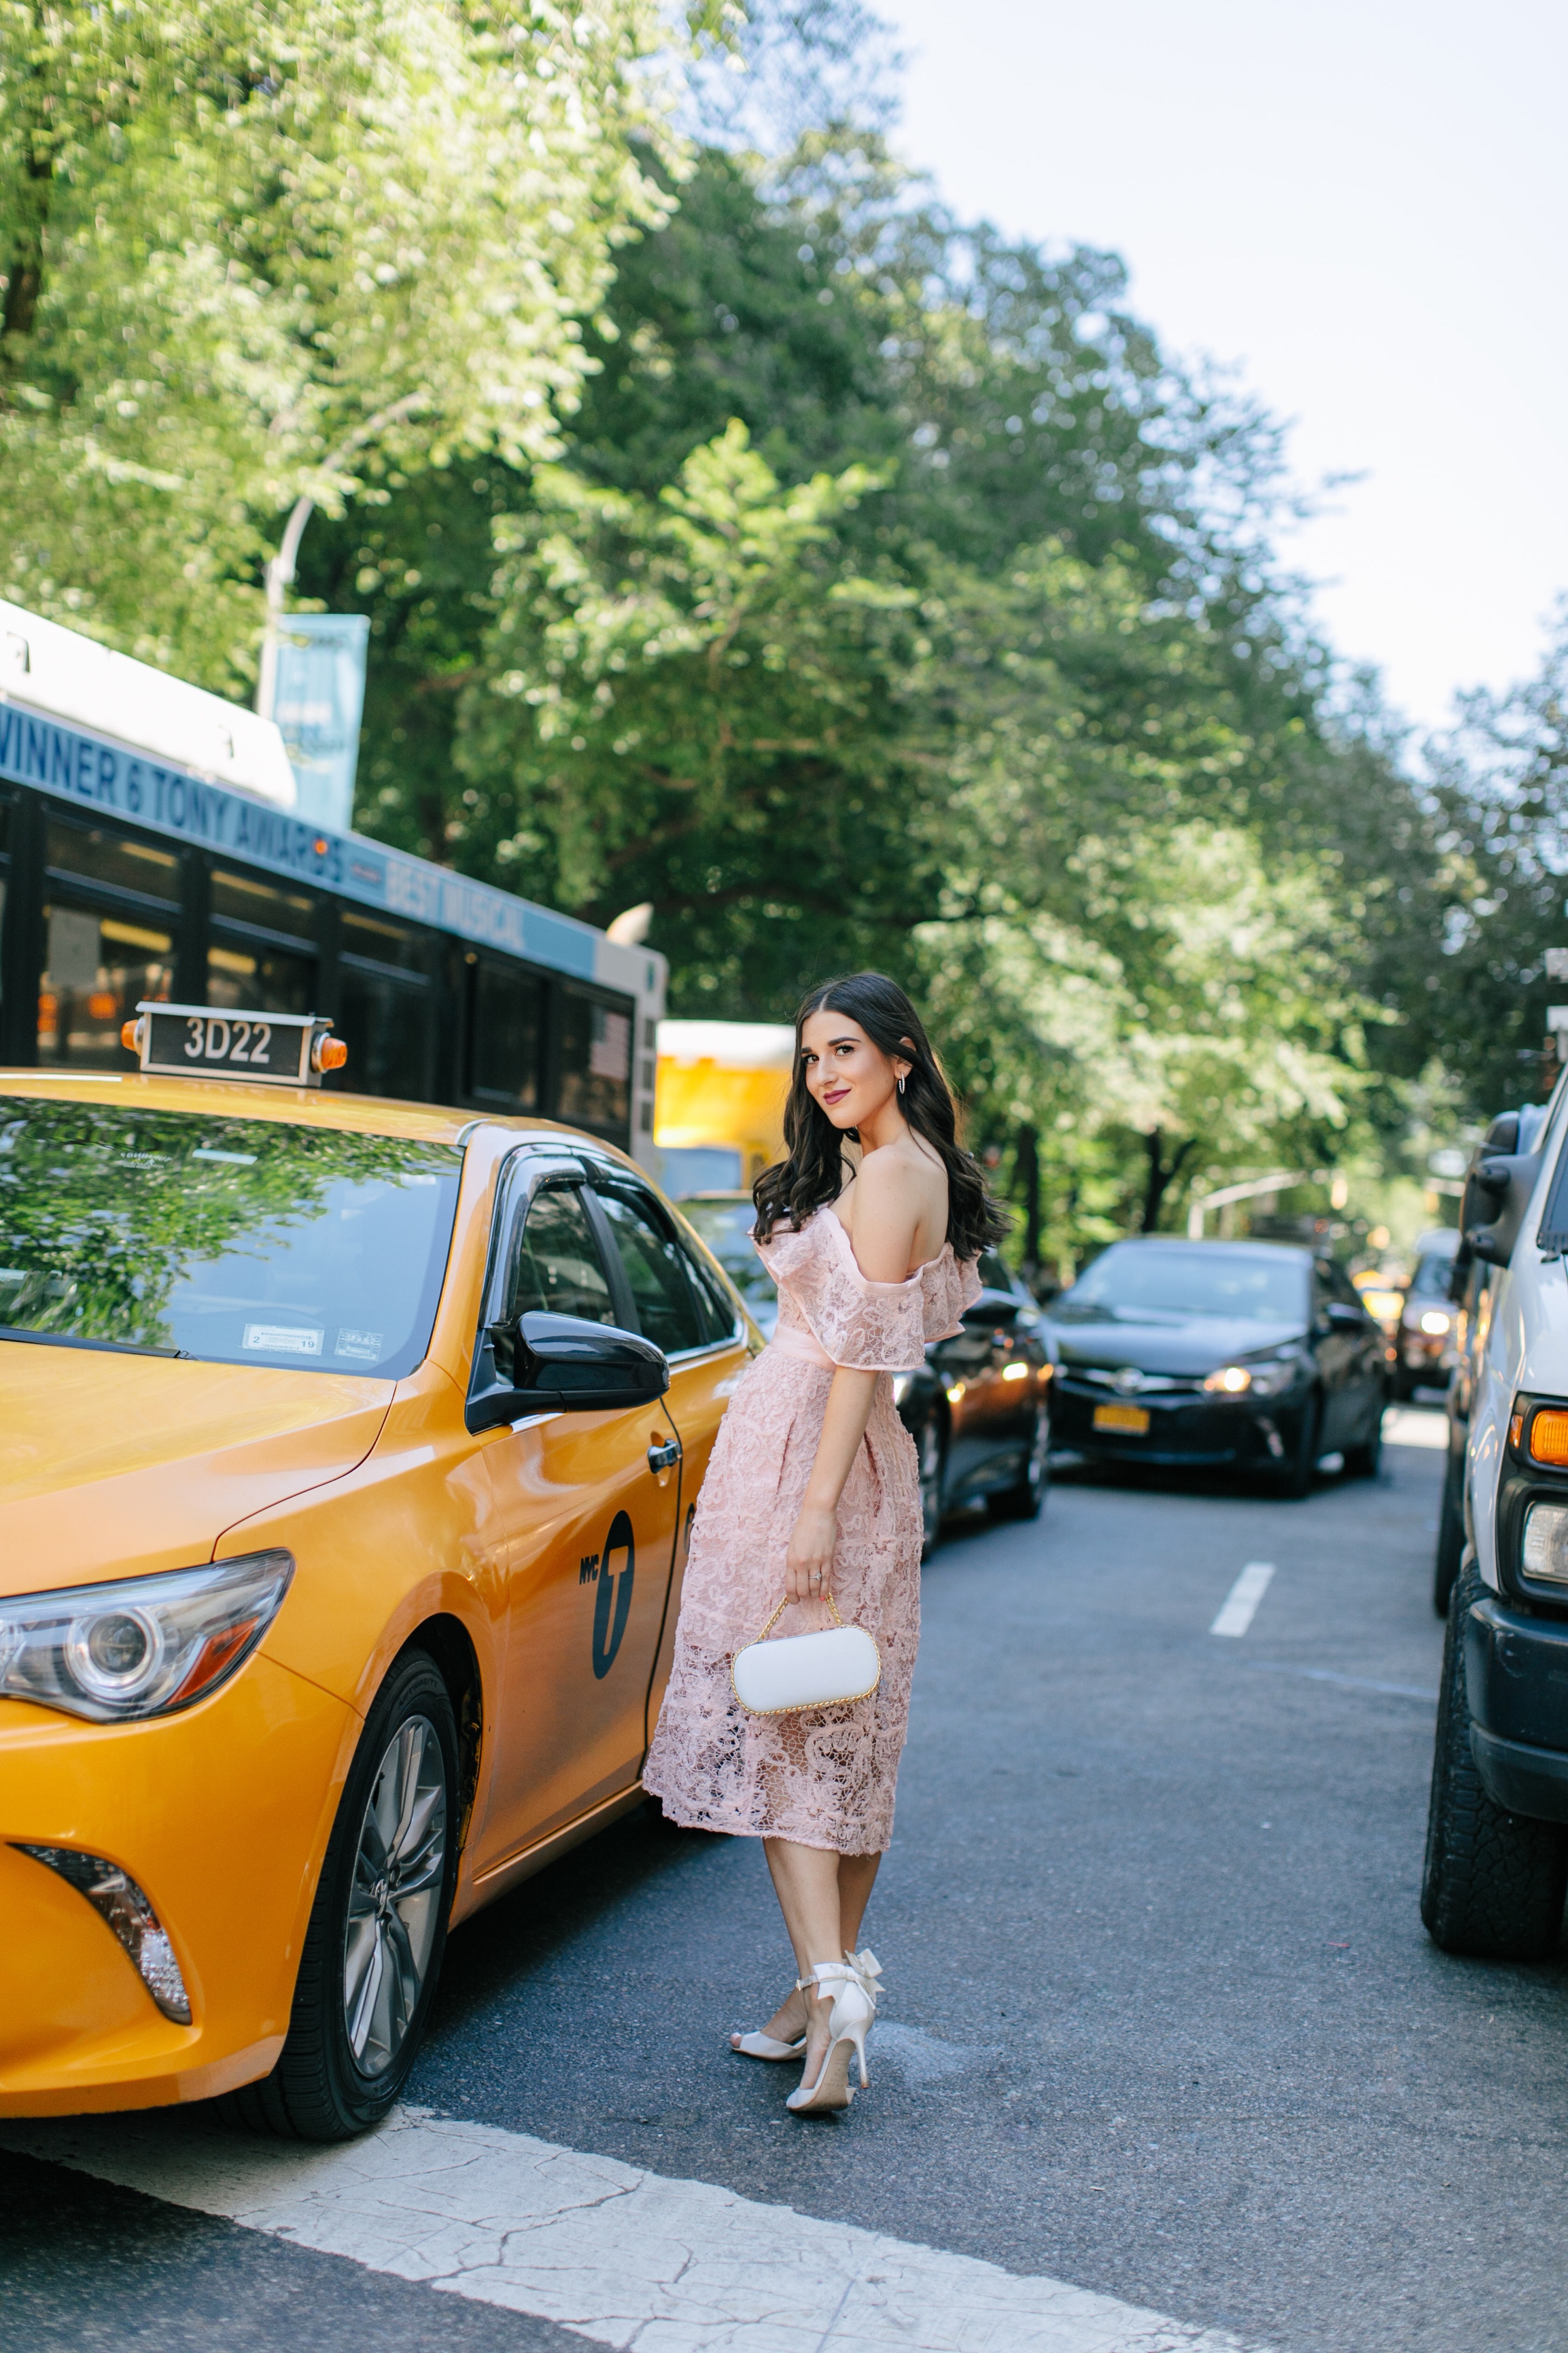 A New Perspective On Instagram Jealousy Pink Lace Dress Ivory Bow Heels Esther Santer Fashion Blog NYC Street Style Blogger Outfit OOTD Trendy Formal White Bag Clutch Self Portrait Designer Kate Spade Wedding Shoes Fancy Elegant Feminine Shopping Wear.jpg